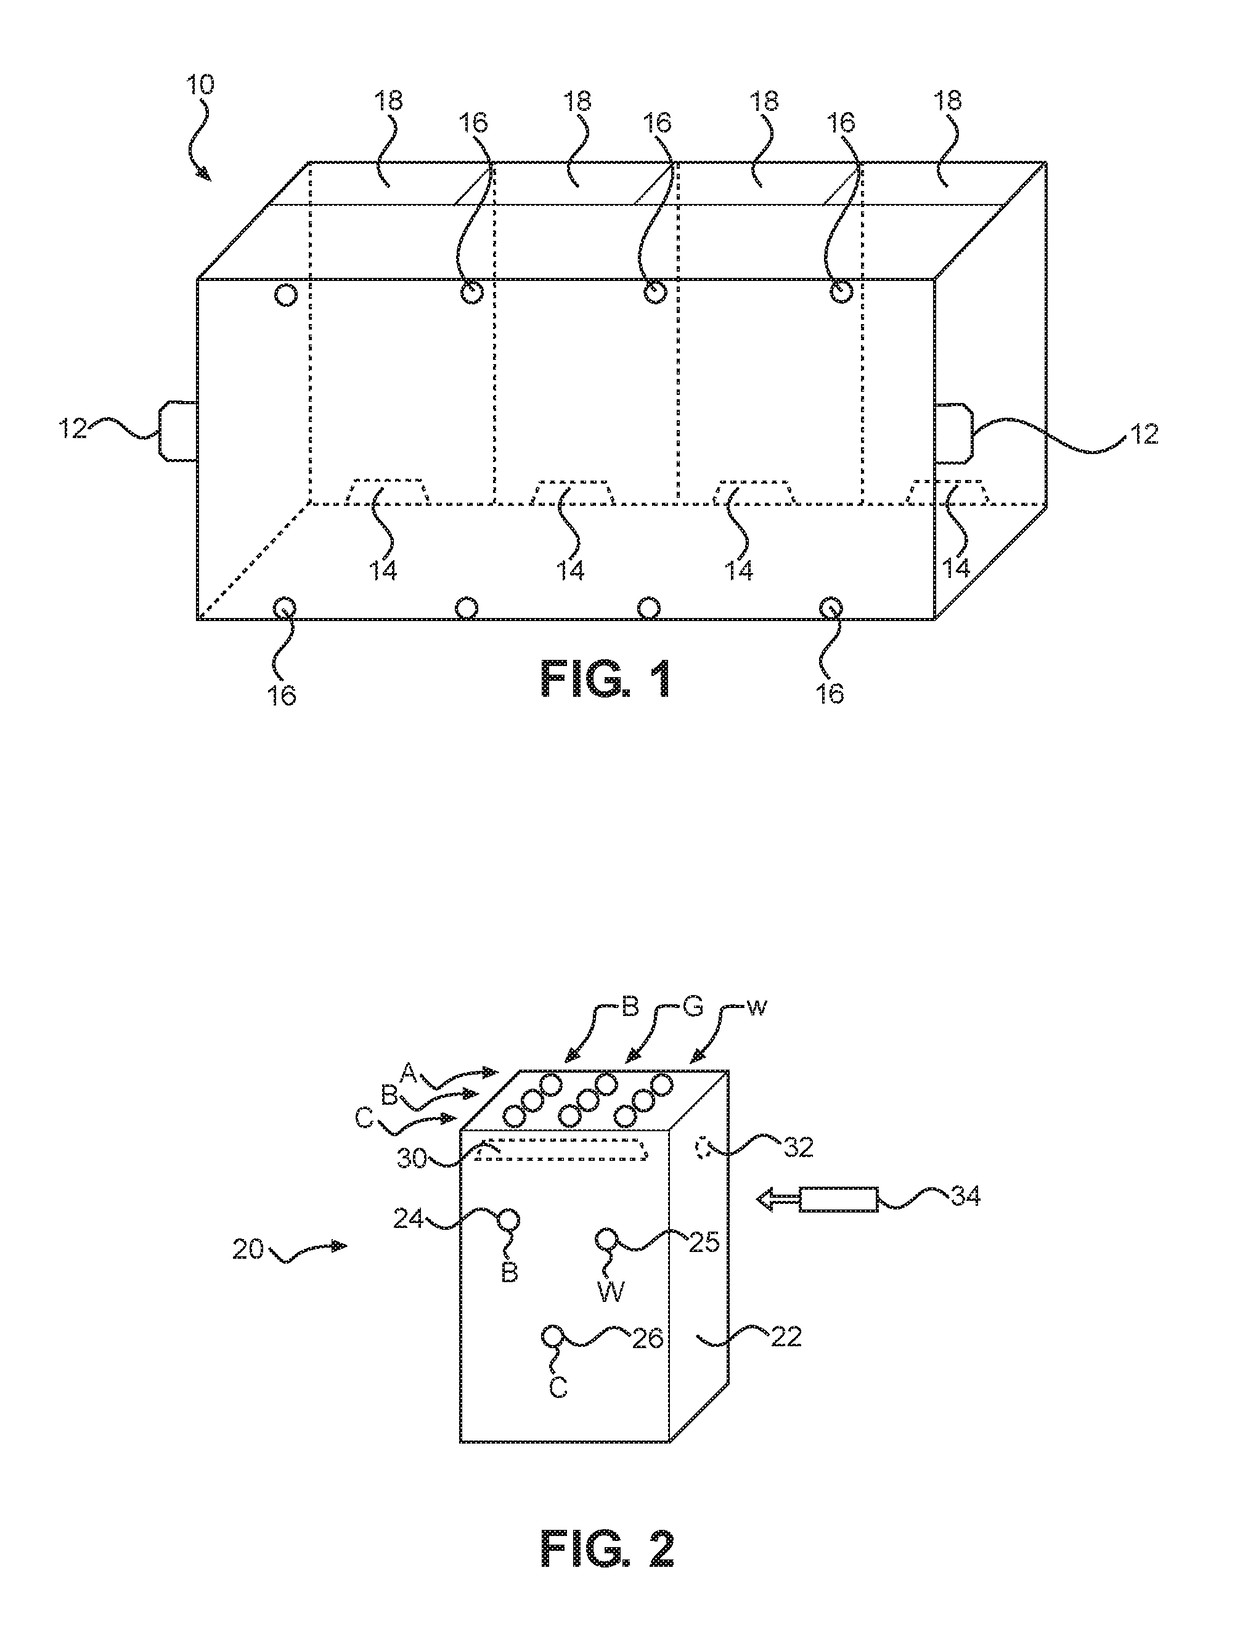 Building wiring system, components and methods